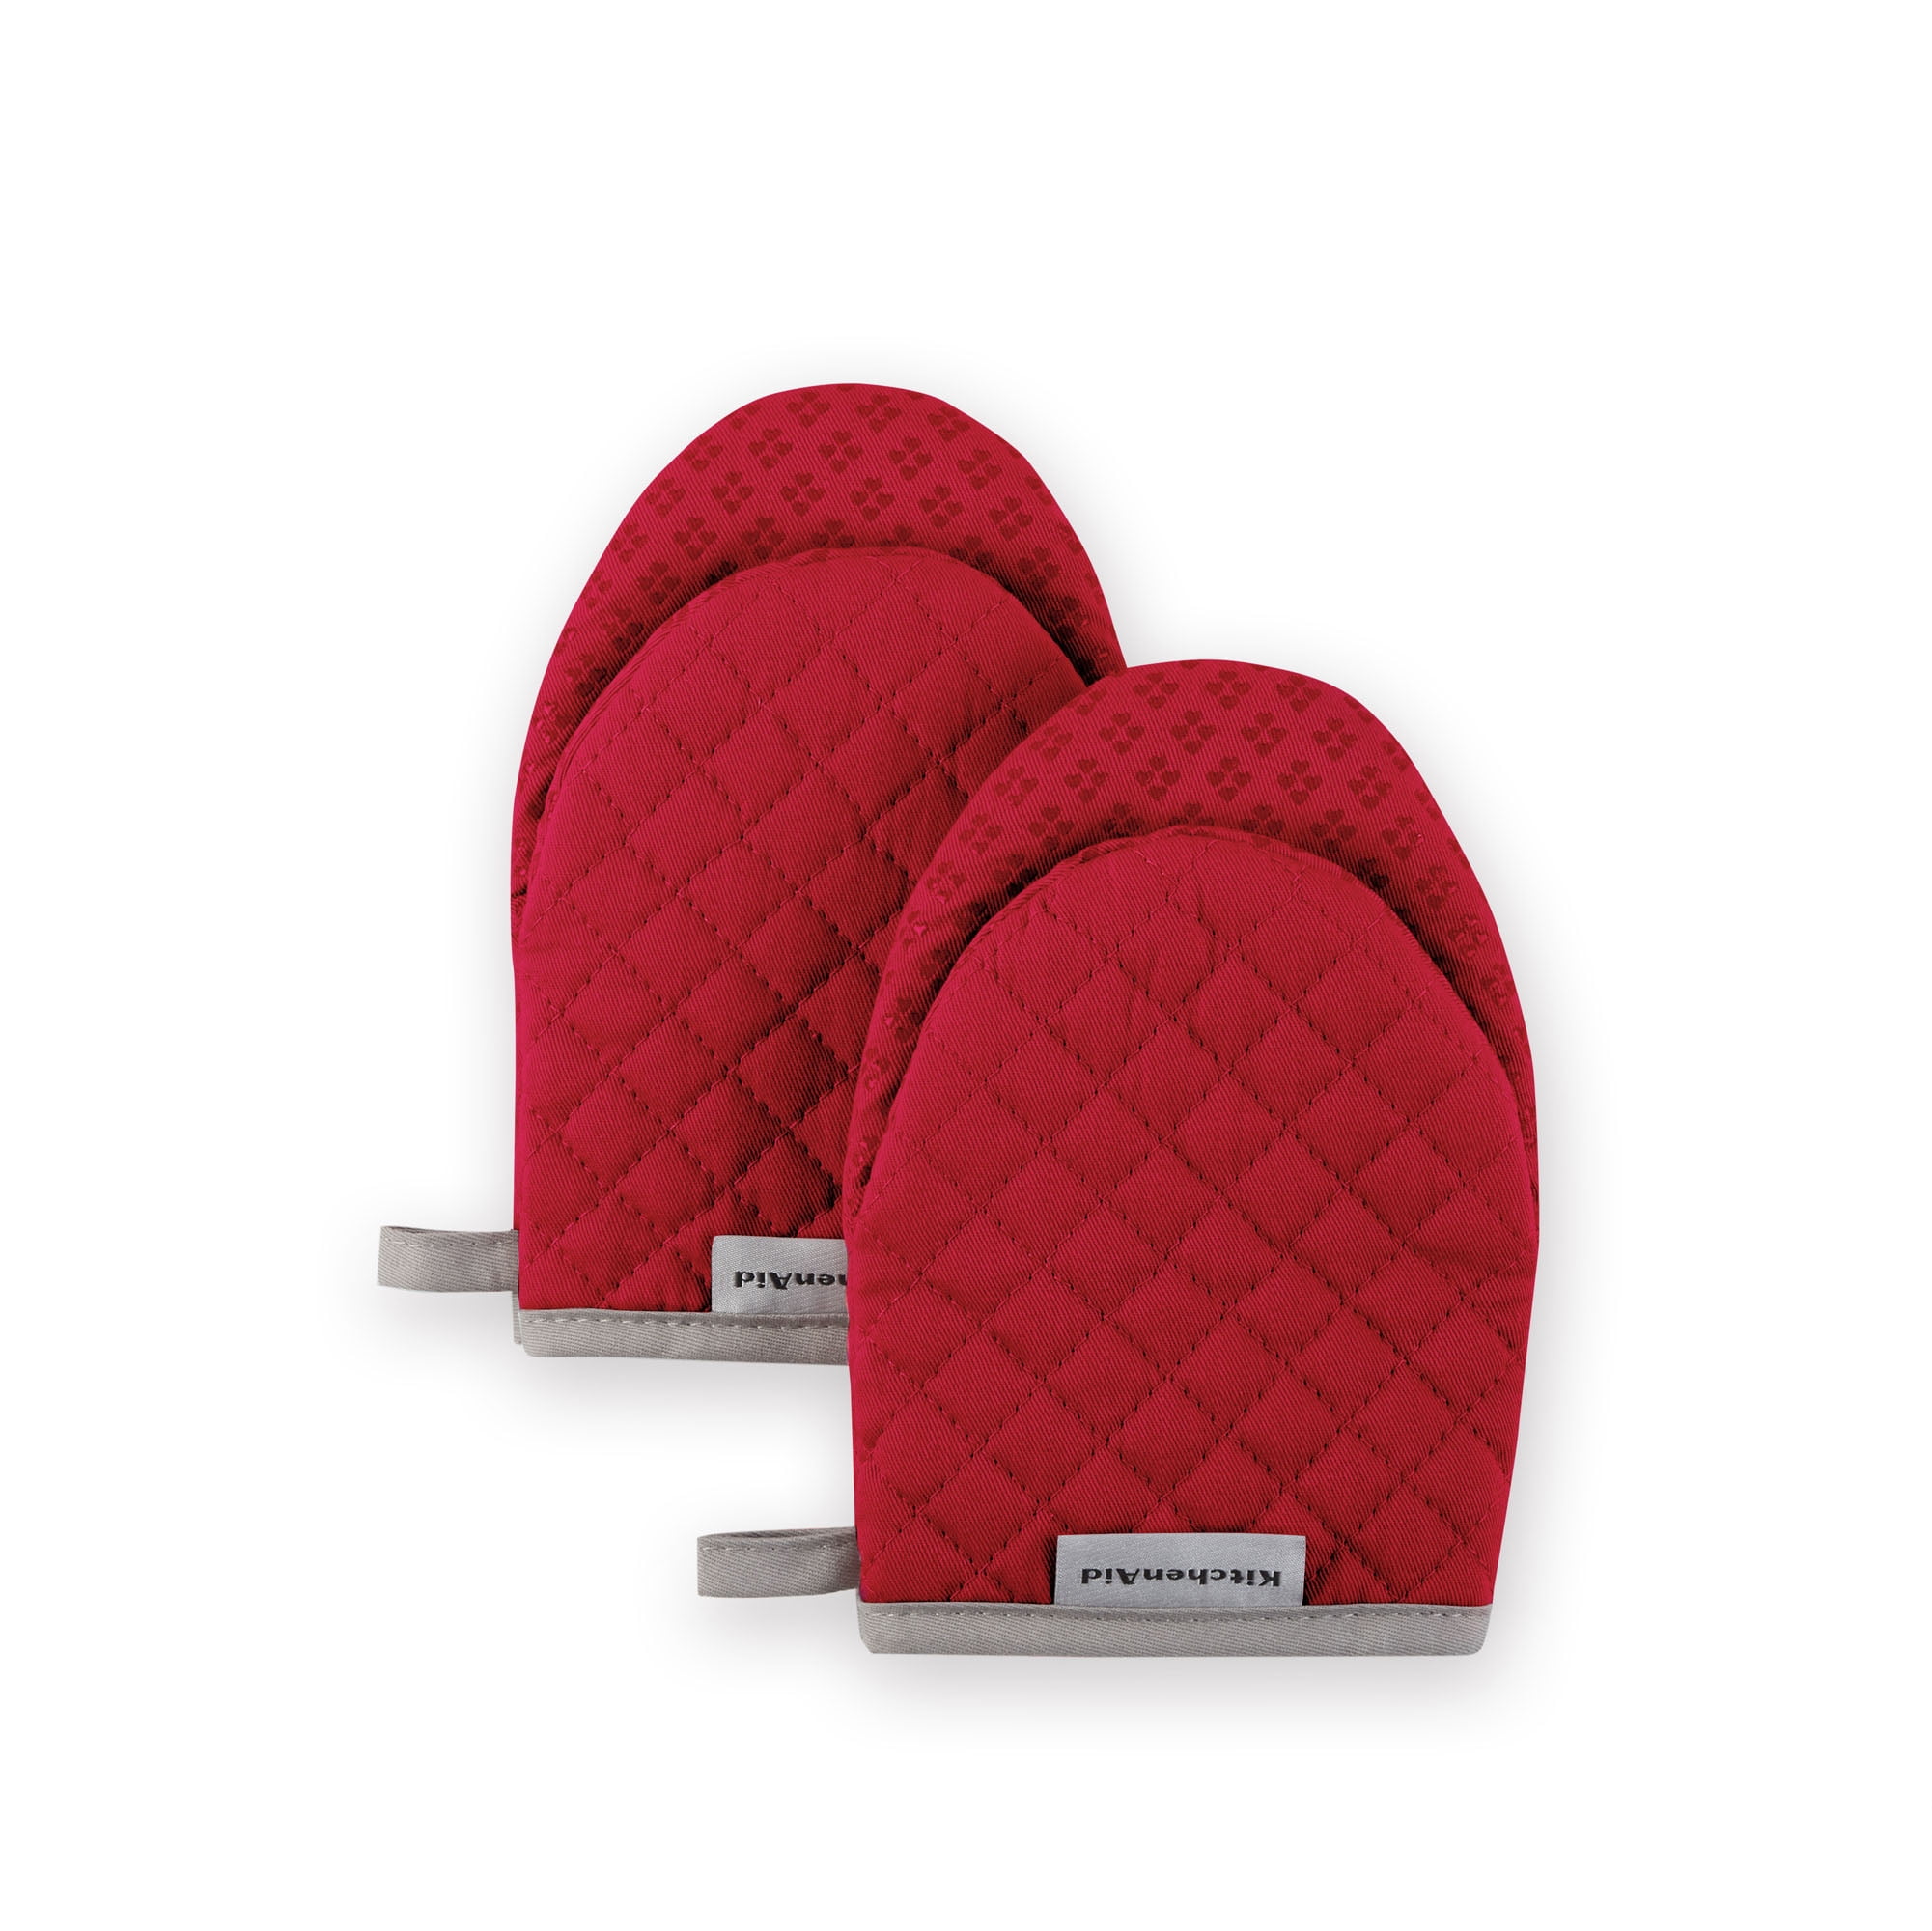 KitchenAid Asteroid Mini Cotton Oven Mitts with Silicone Grip, Red - set of 2